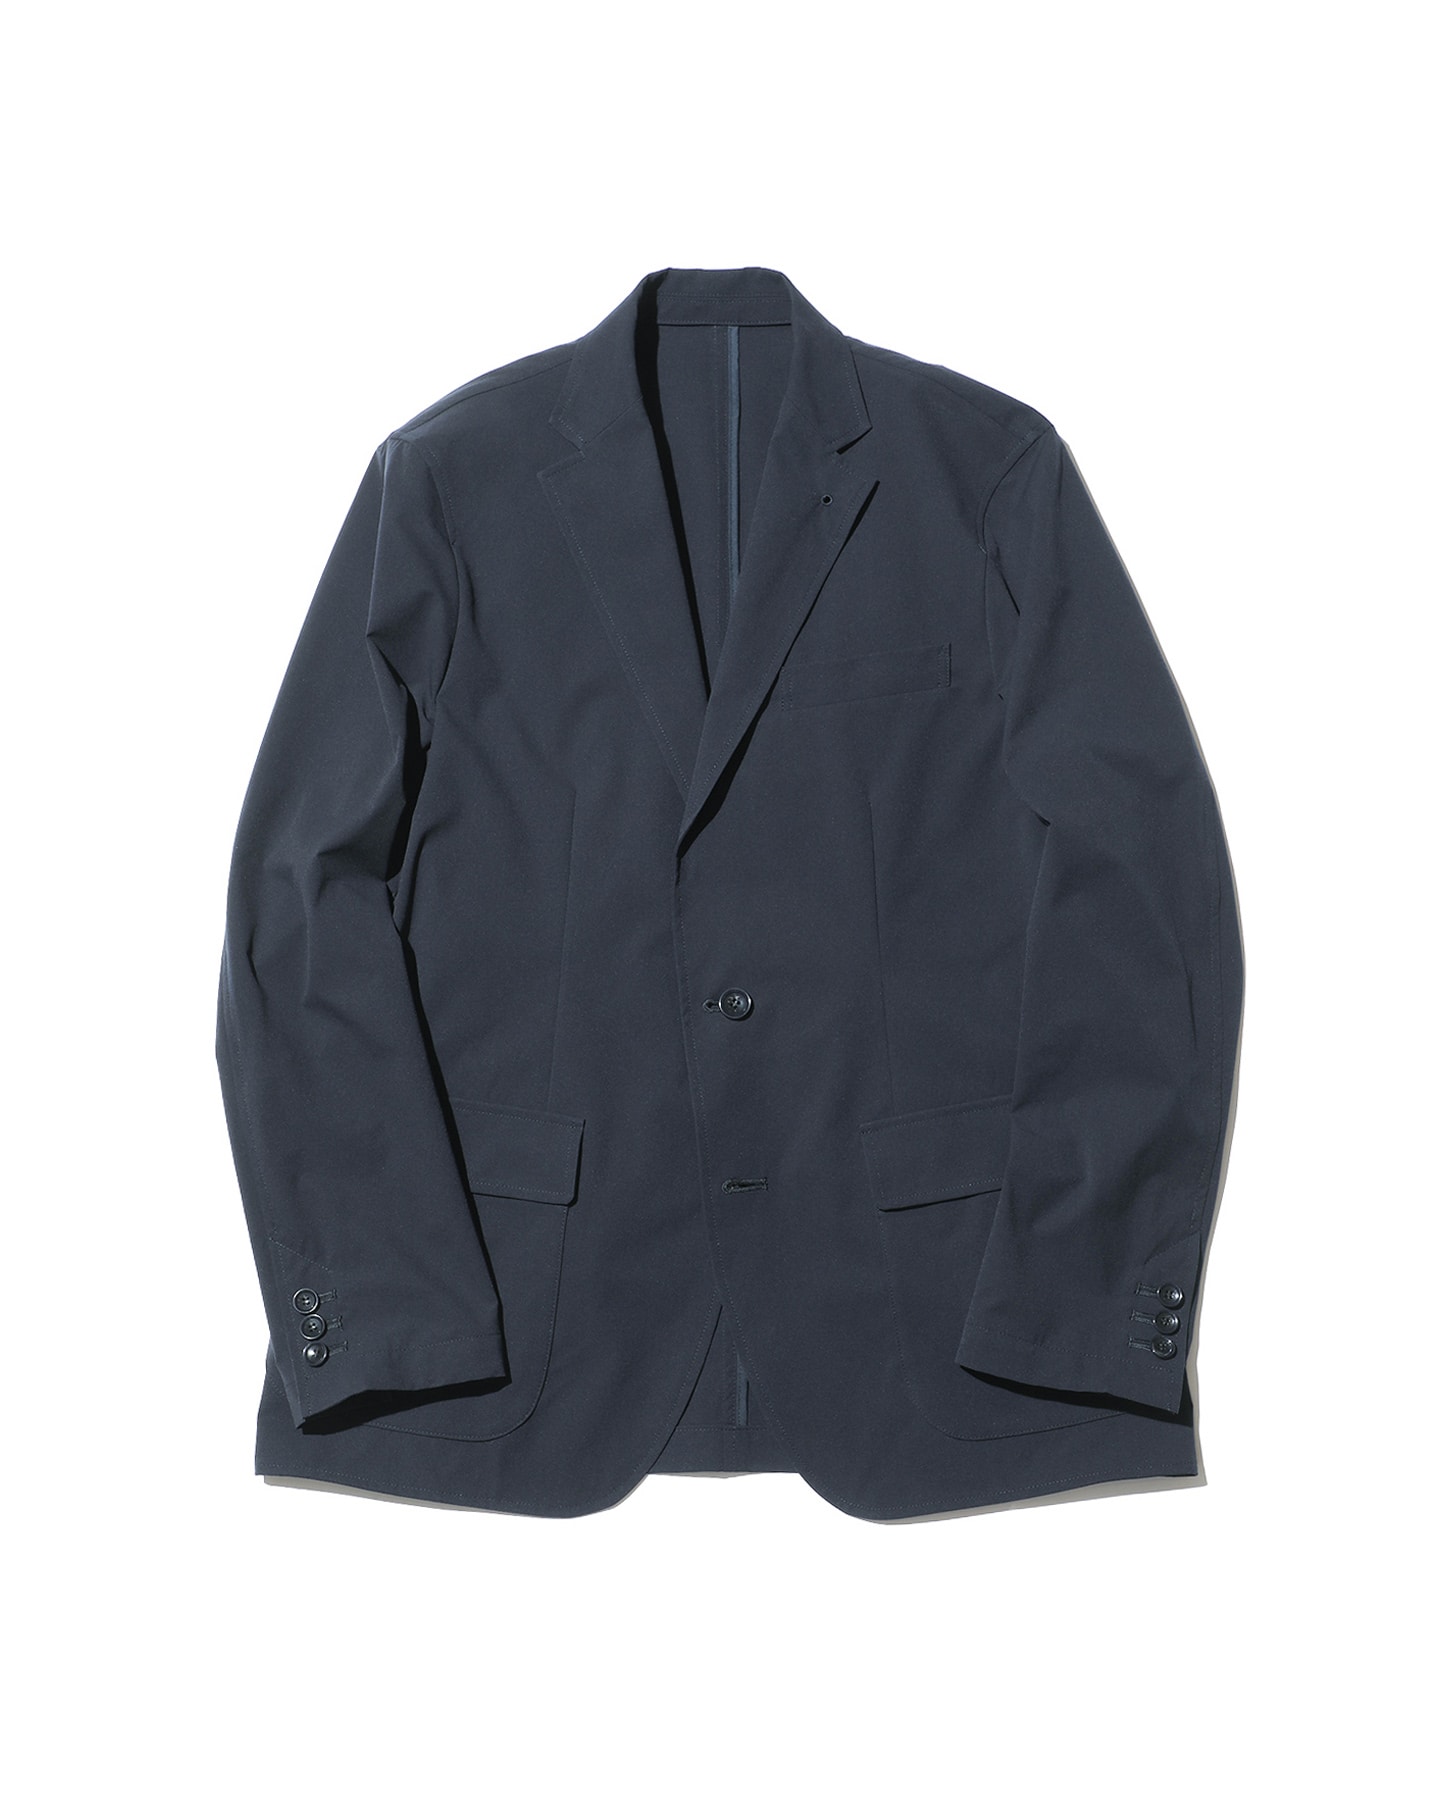 SOPH. | 4WAY STRETCH PACKABLE 2BUTTON JACKET(L NAVY):